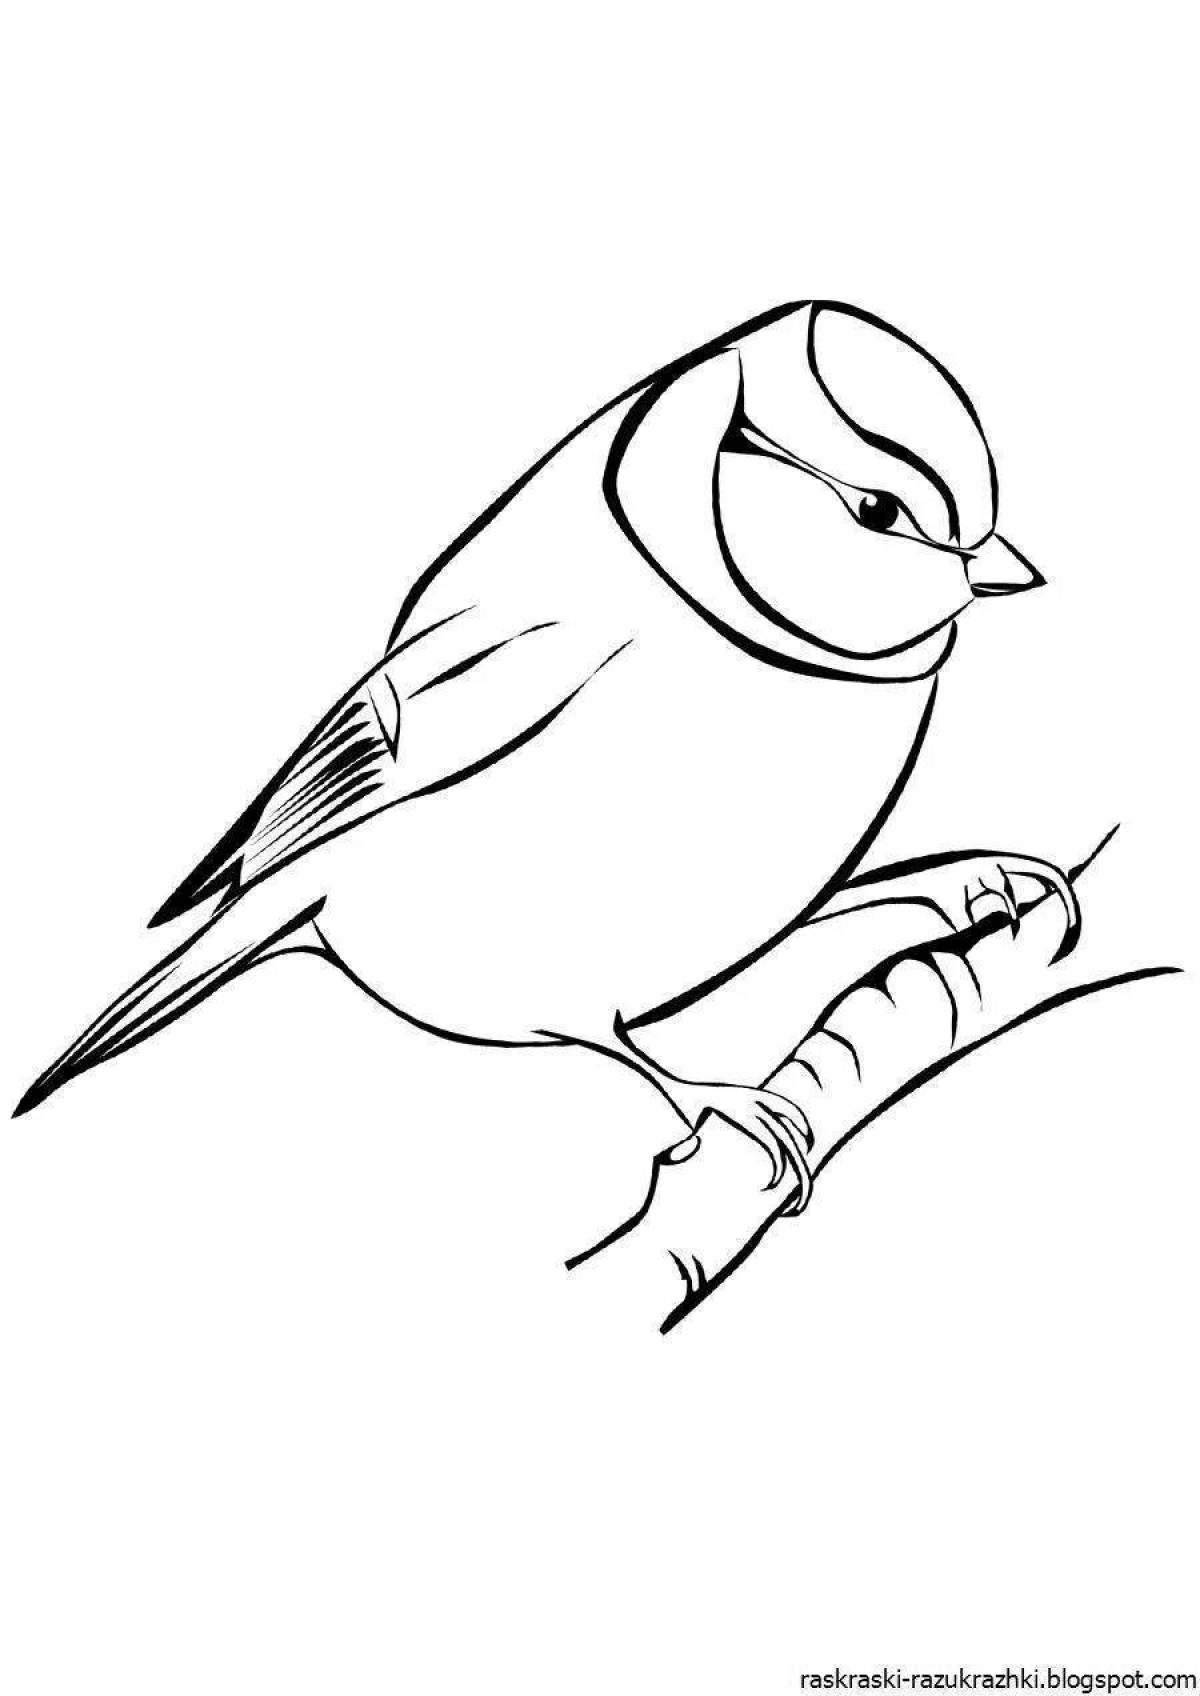 Coloring page amazing pattern of a titmouse